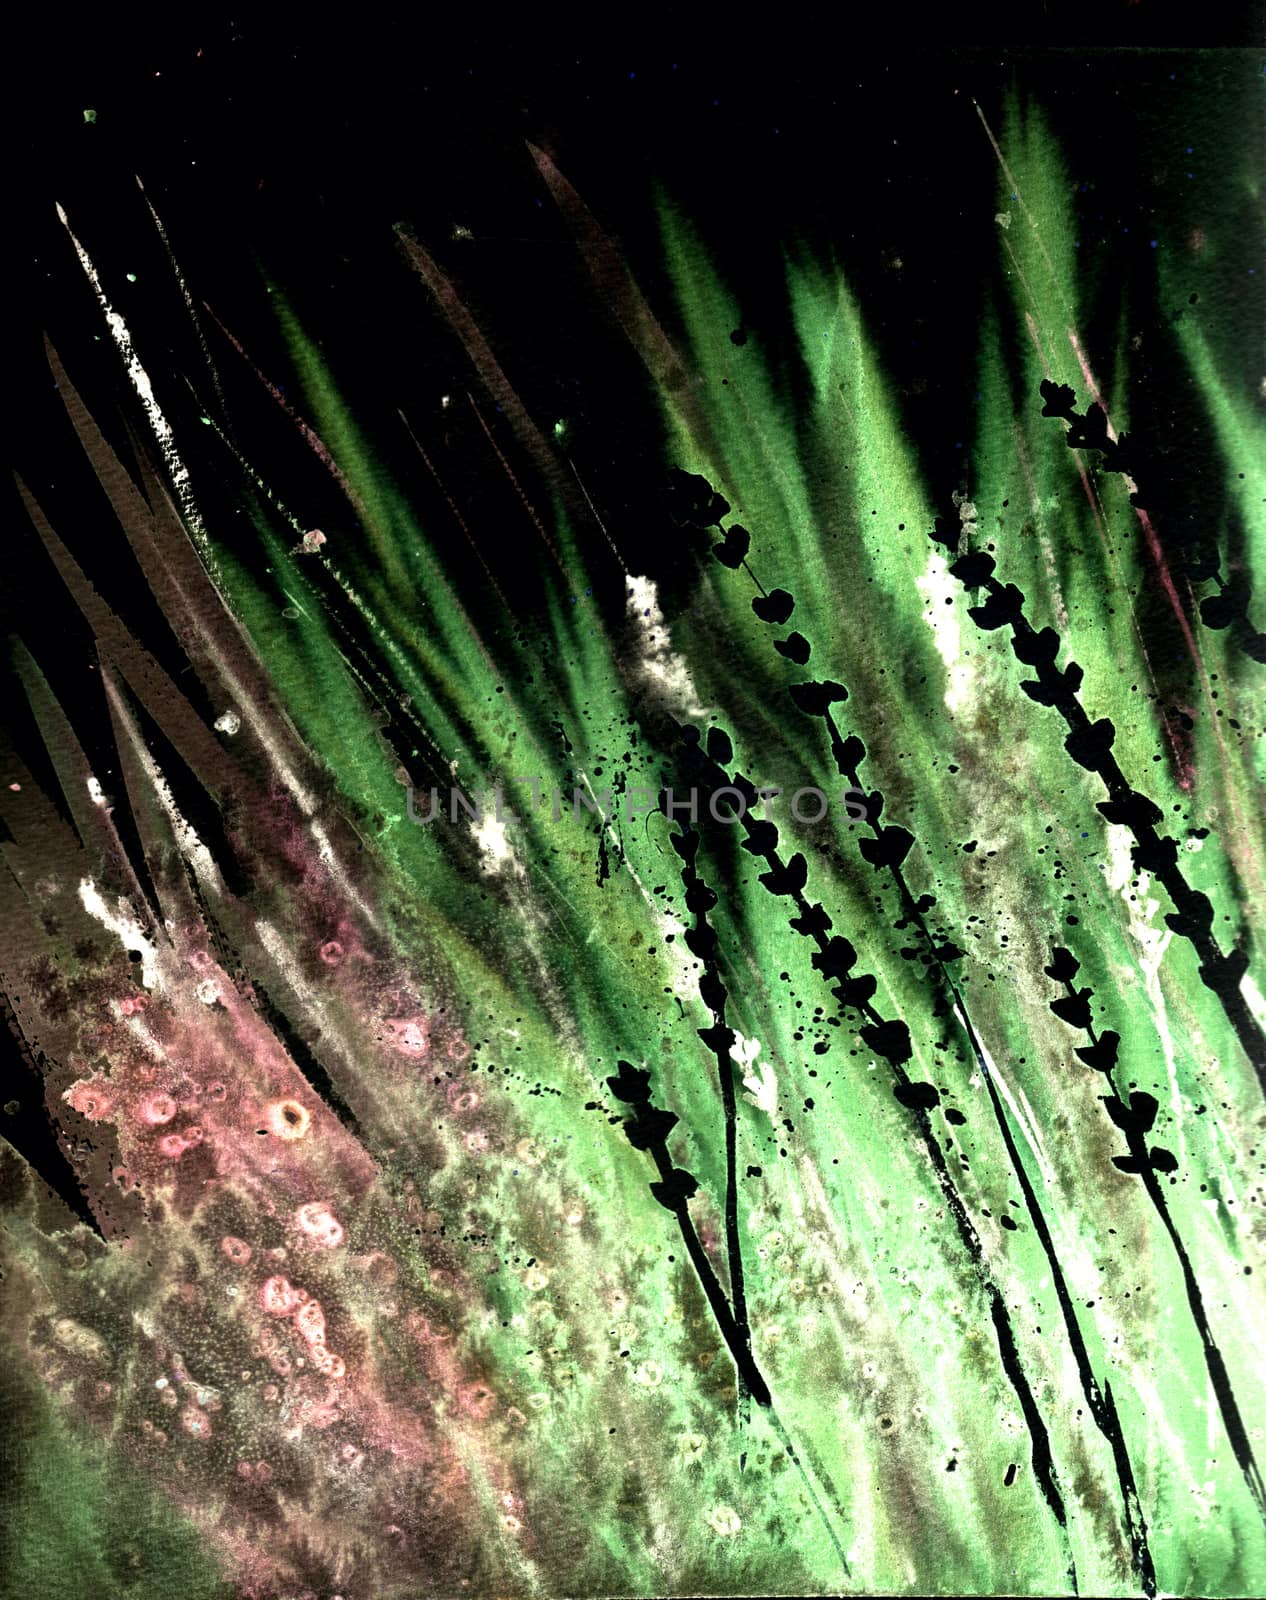 Abstract grass in the wind, dark and neon colors. by sshisshka